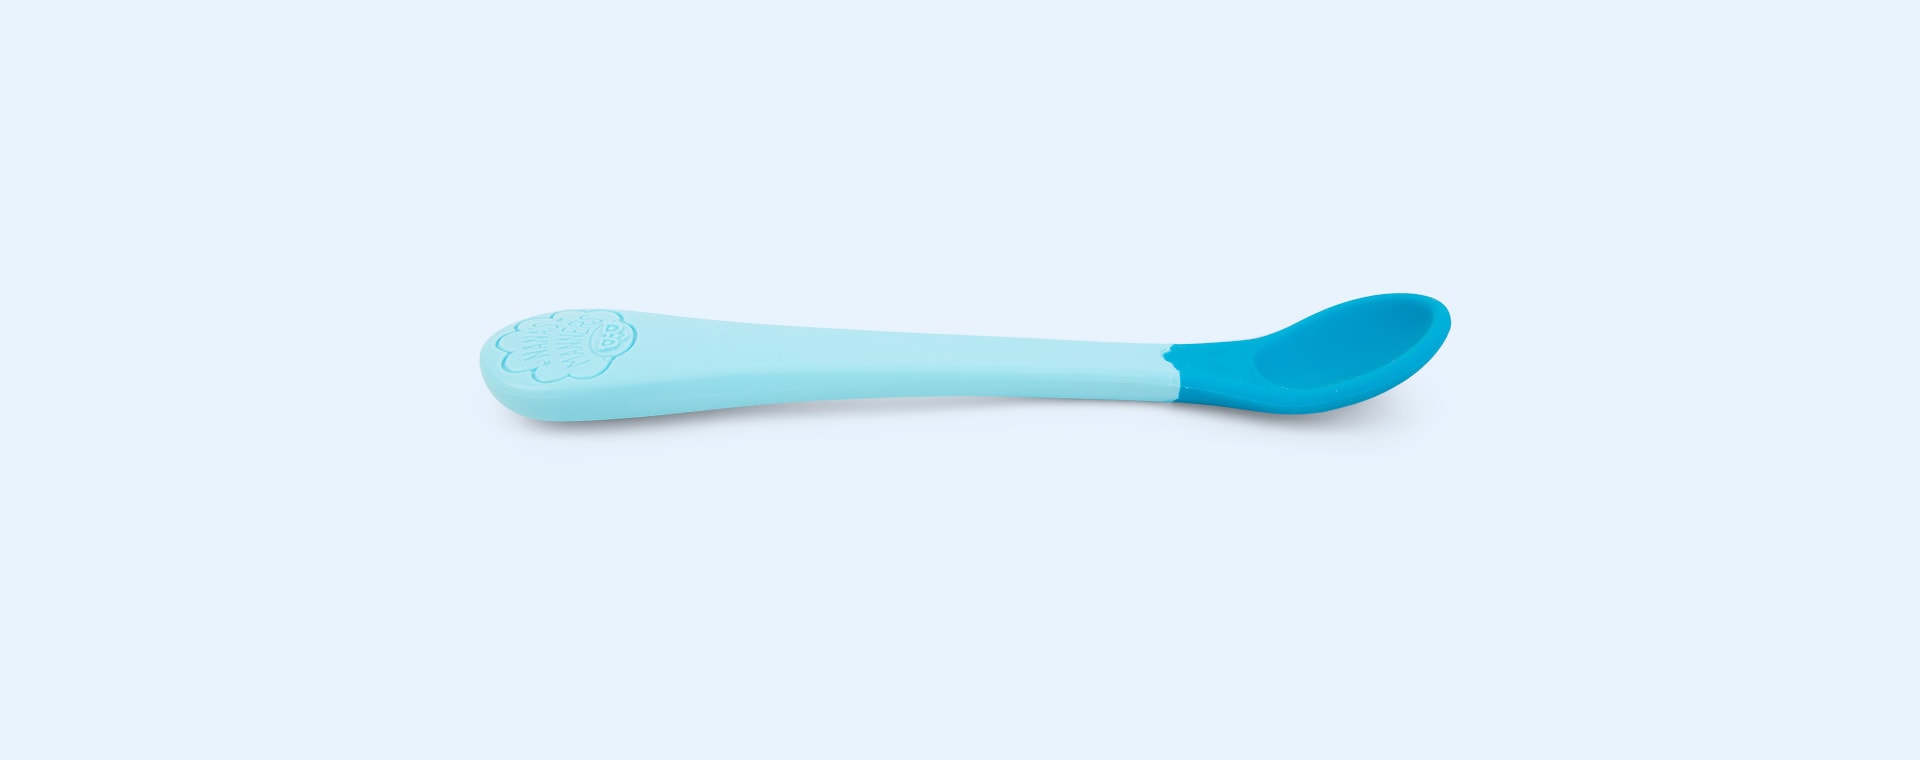 Multi Nana's Manners 3-Pack Stage 1 Weaning Spoons